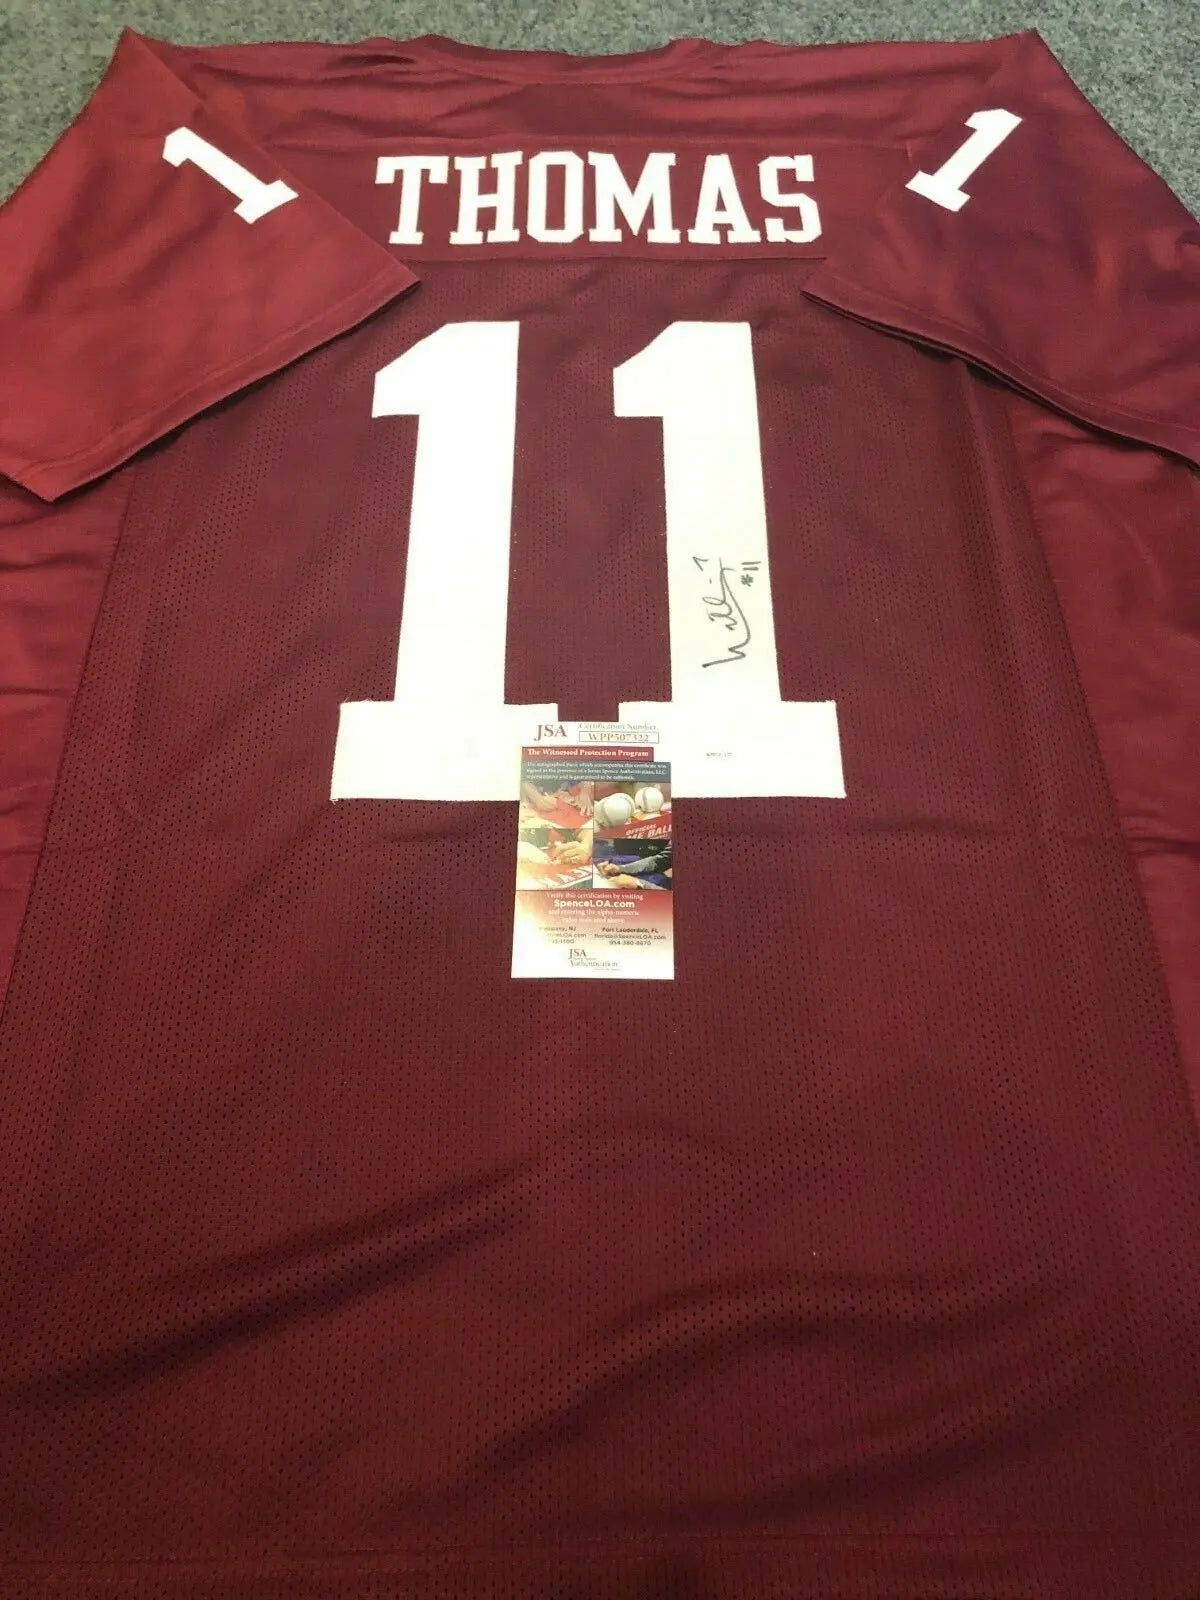 MVP Authentics Texas A&M Willie Thomas Autographed Signed Jersey Jsa  Coa 108 sports jersey framing , jersey framing